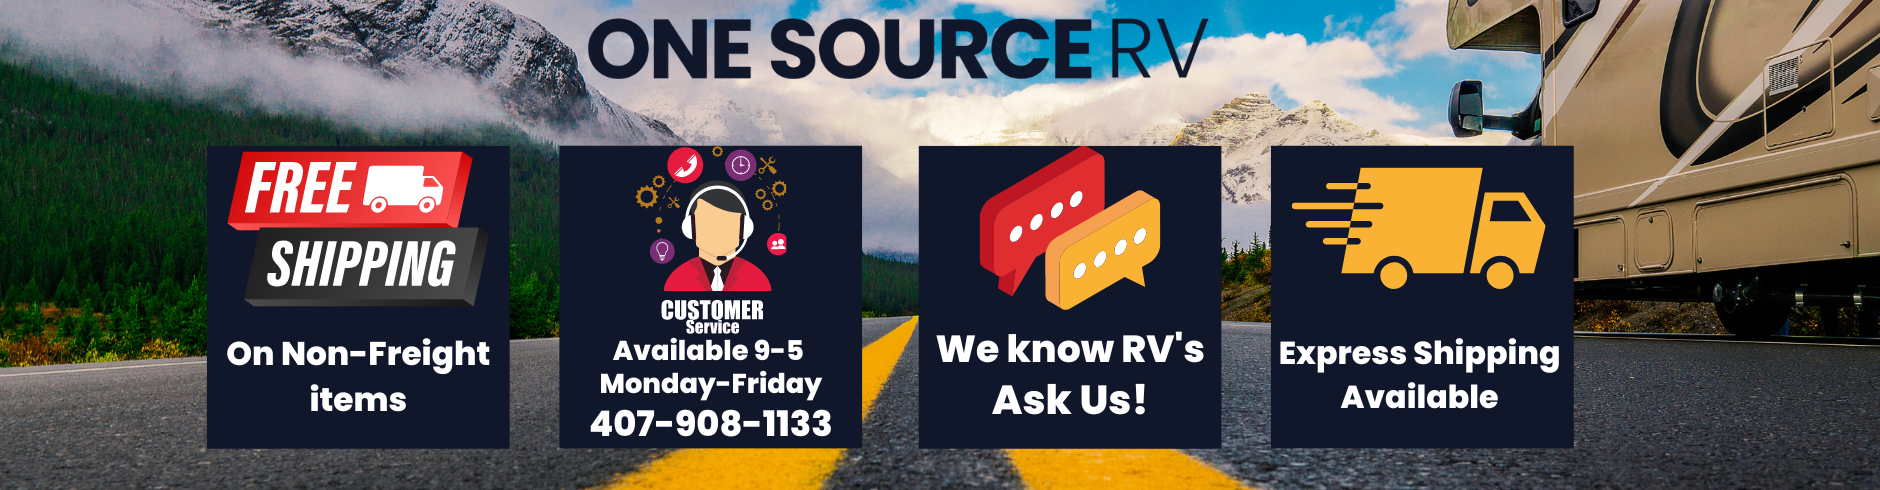 One Source RV | Free Shipping on Non-Freight Items | Express Shipping Available | Customer Service 9-5 Monday-Friday | Ask Us Your RV Questions